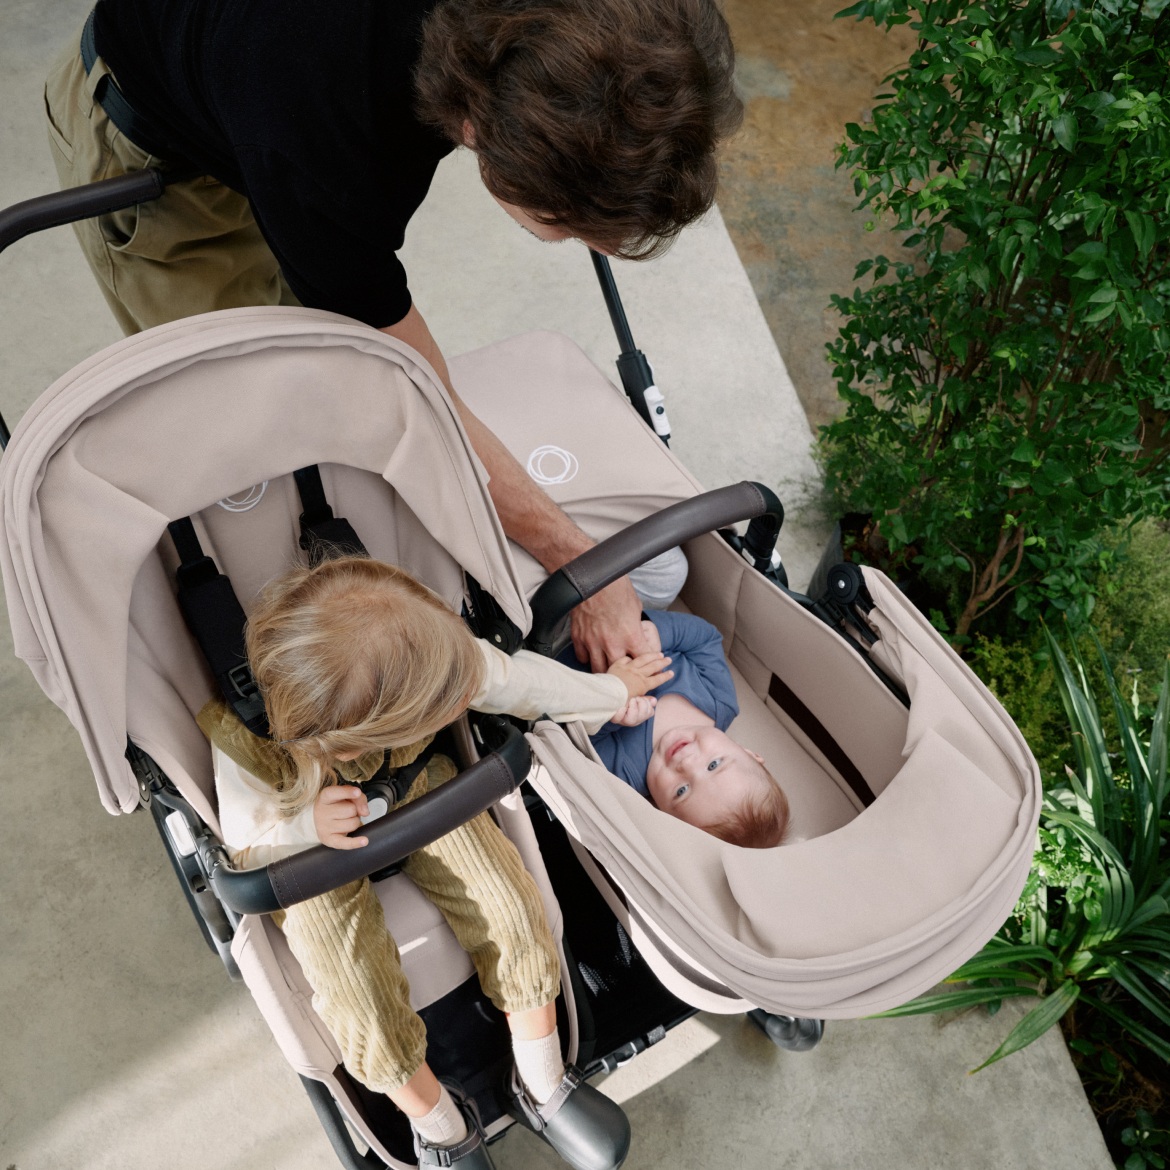 A mom strolls with two children in a Bugaboo Donkey 5 double pram. The girl in the seat is reaching out to her sibling in the bassinet.